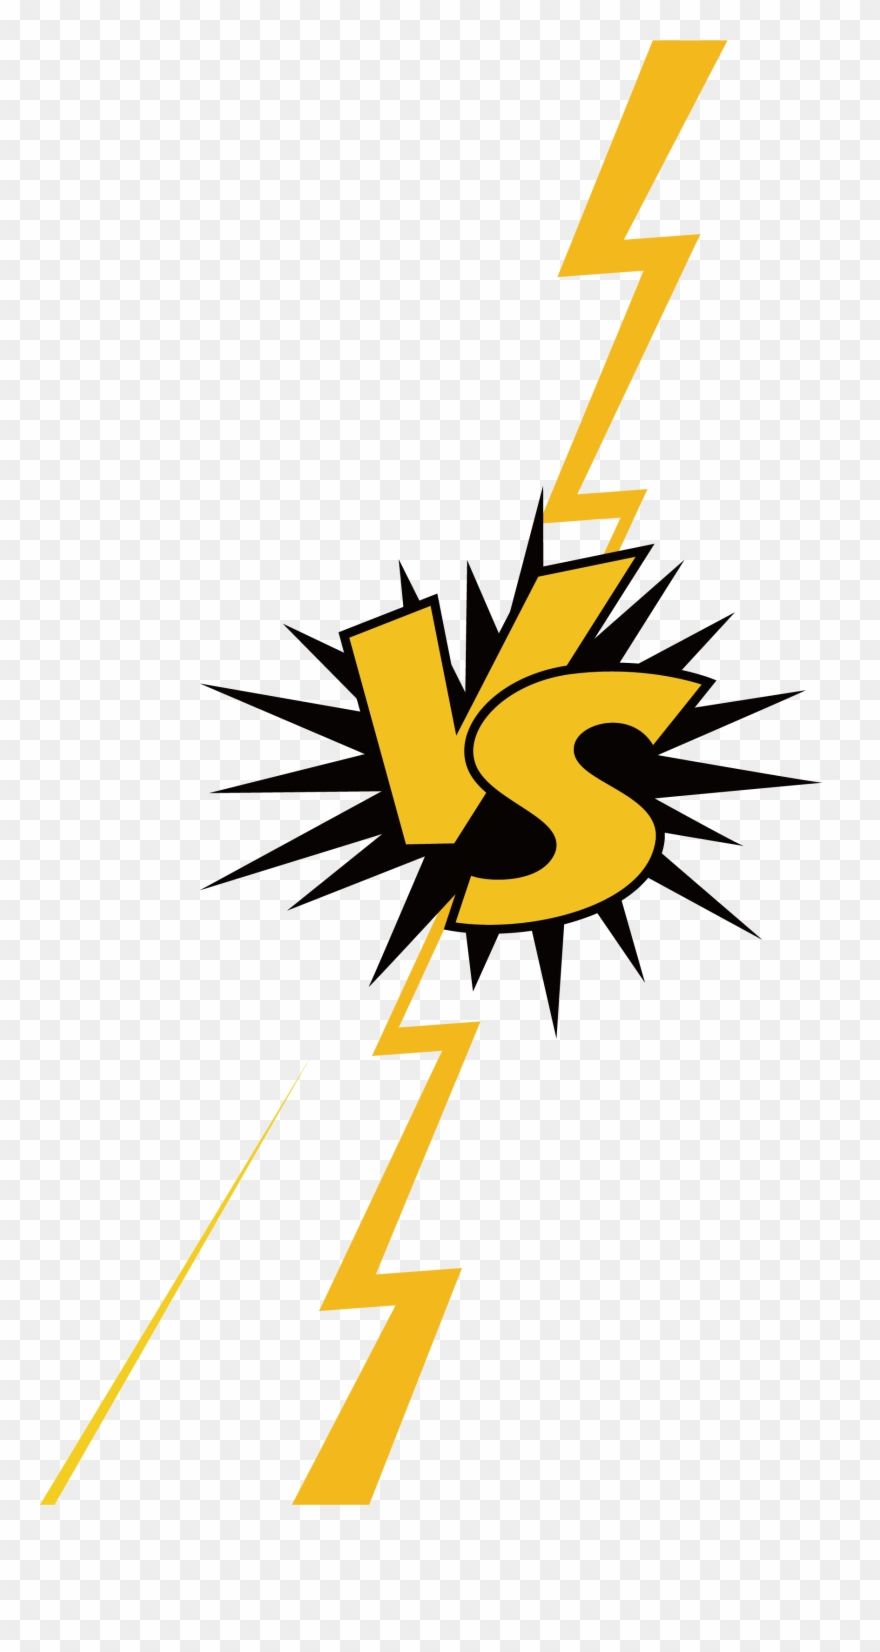 Versus Vs Vector Hd Images, Vs Or Versus Text Logo Free Png And Vector, Vs,  Versus Text, Vs Logo PNG Image For Free Download